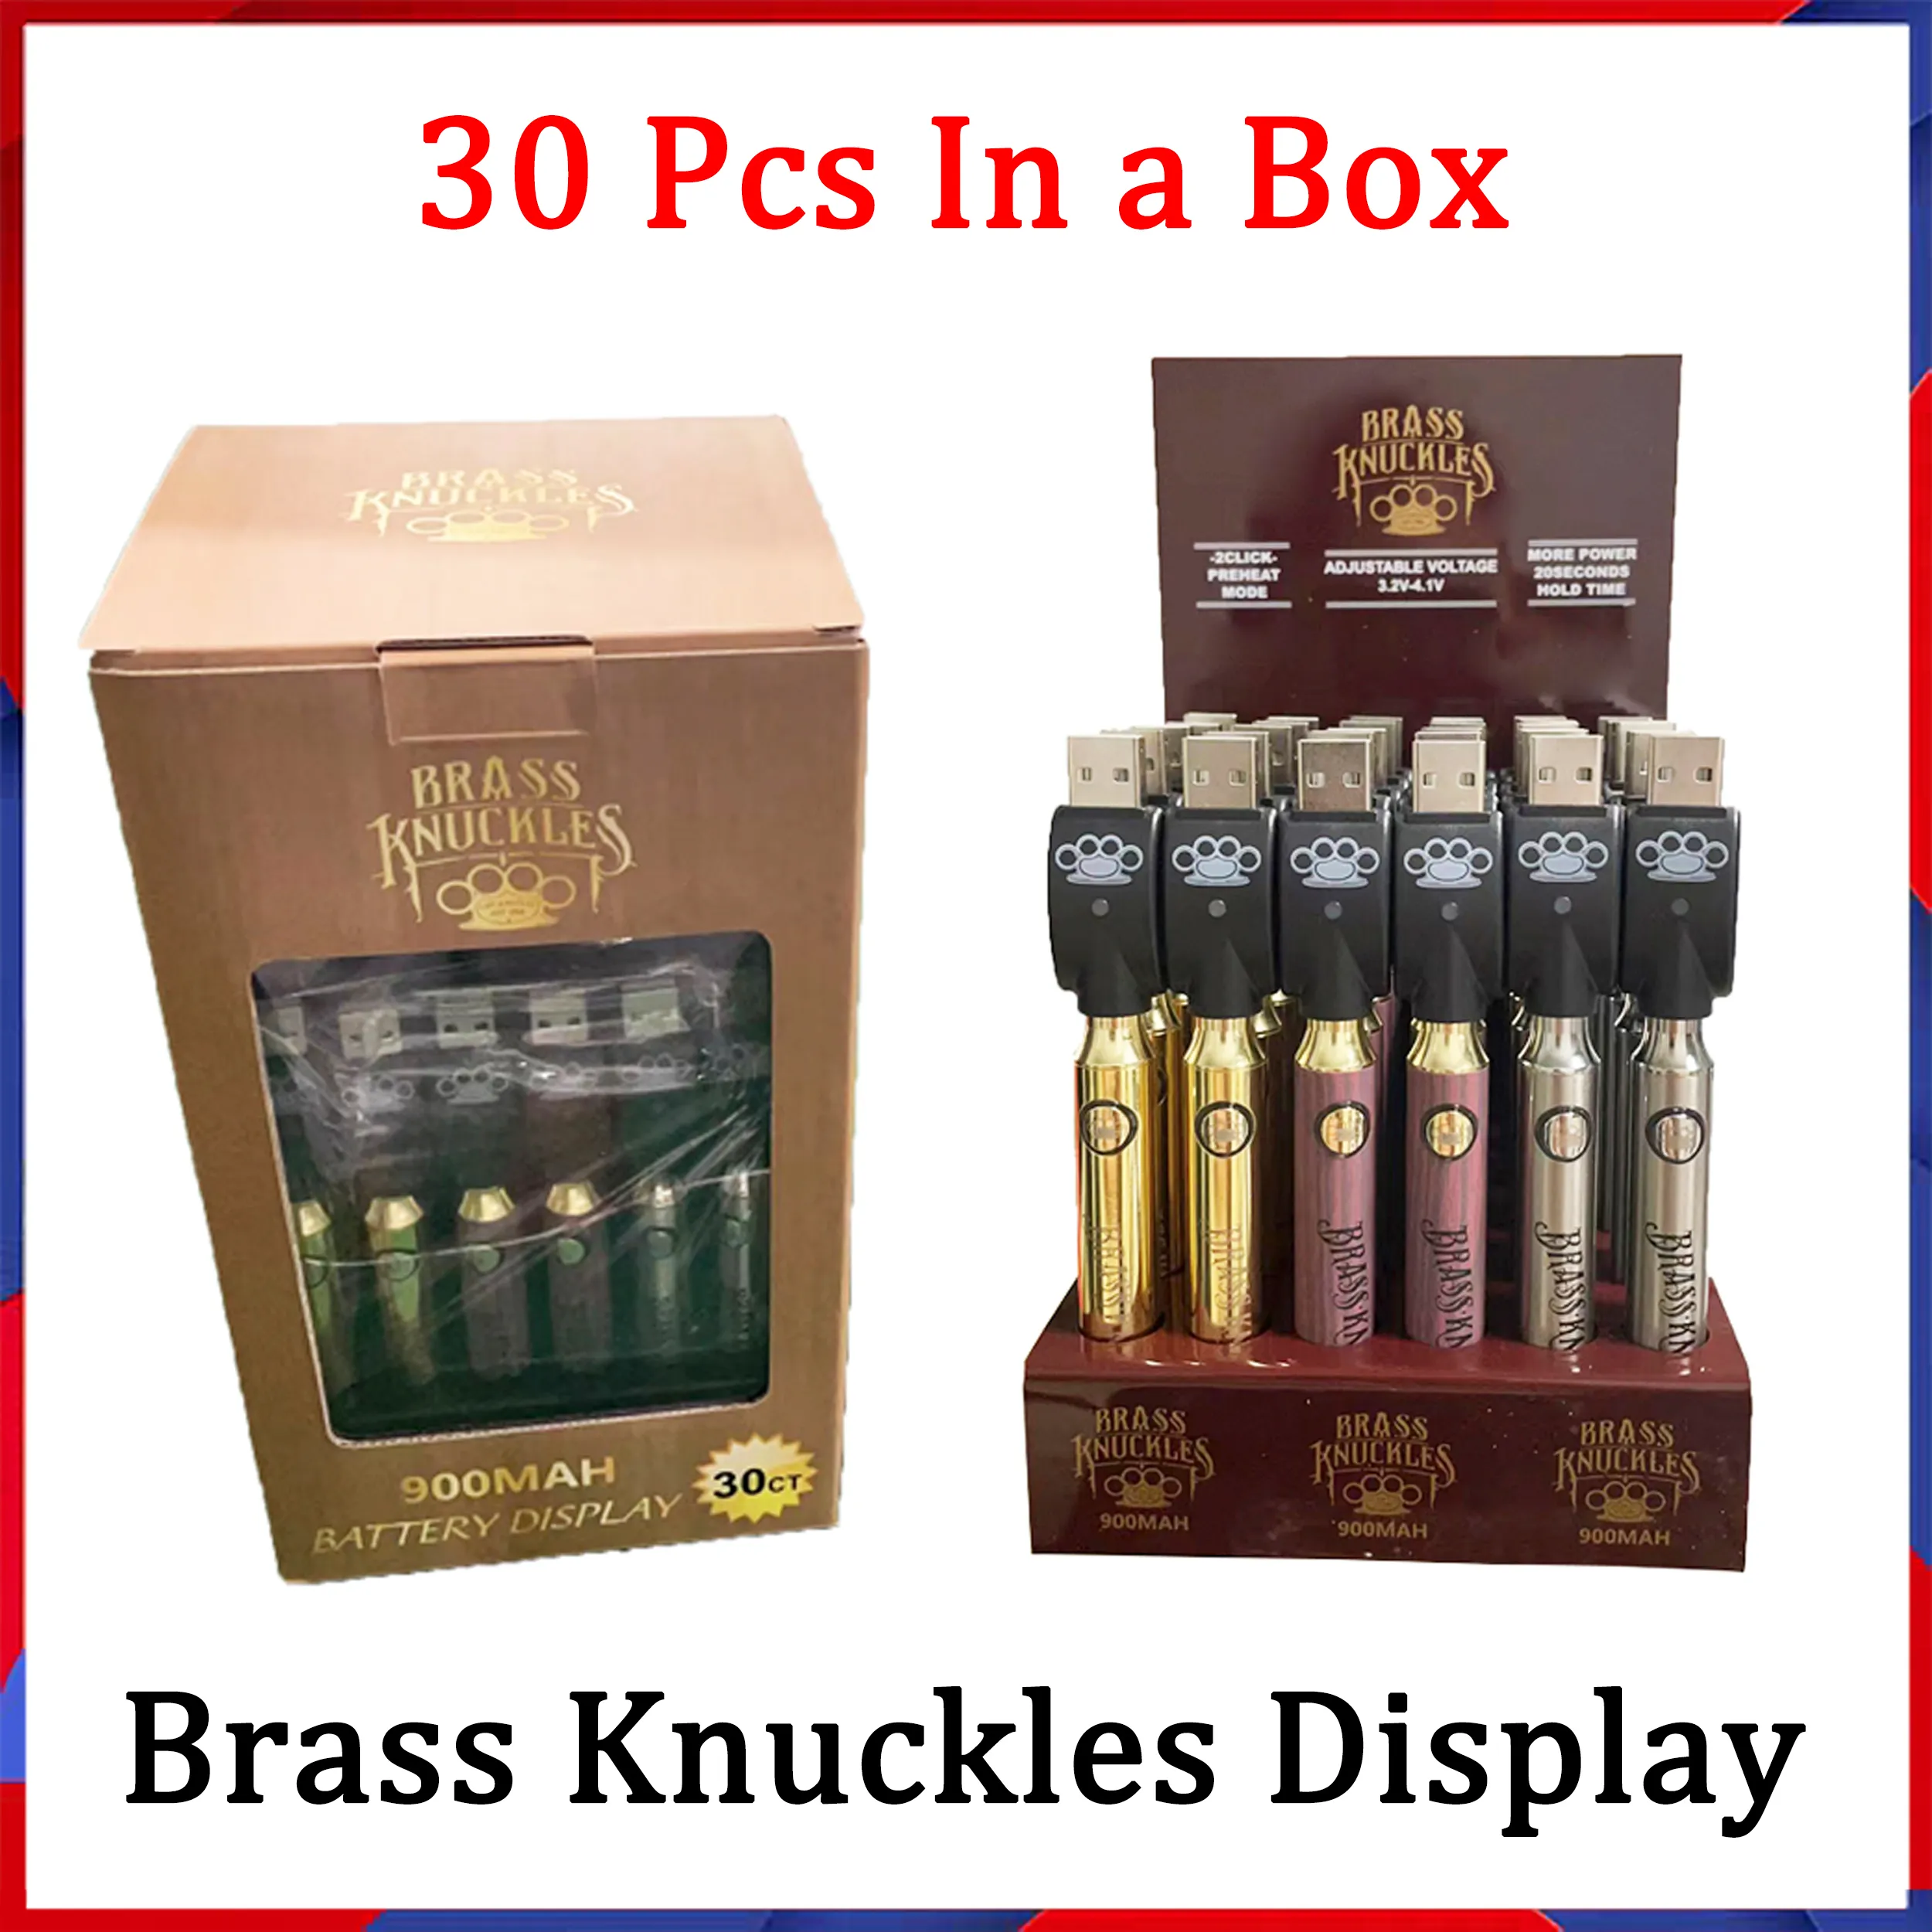 Newest Brass Knuckles Battery Display 900mAh Vape Voltage Adjustable With Chargers Preheat Function 3 Colors 30pcs ct Per Display Fast Send